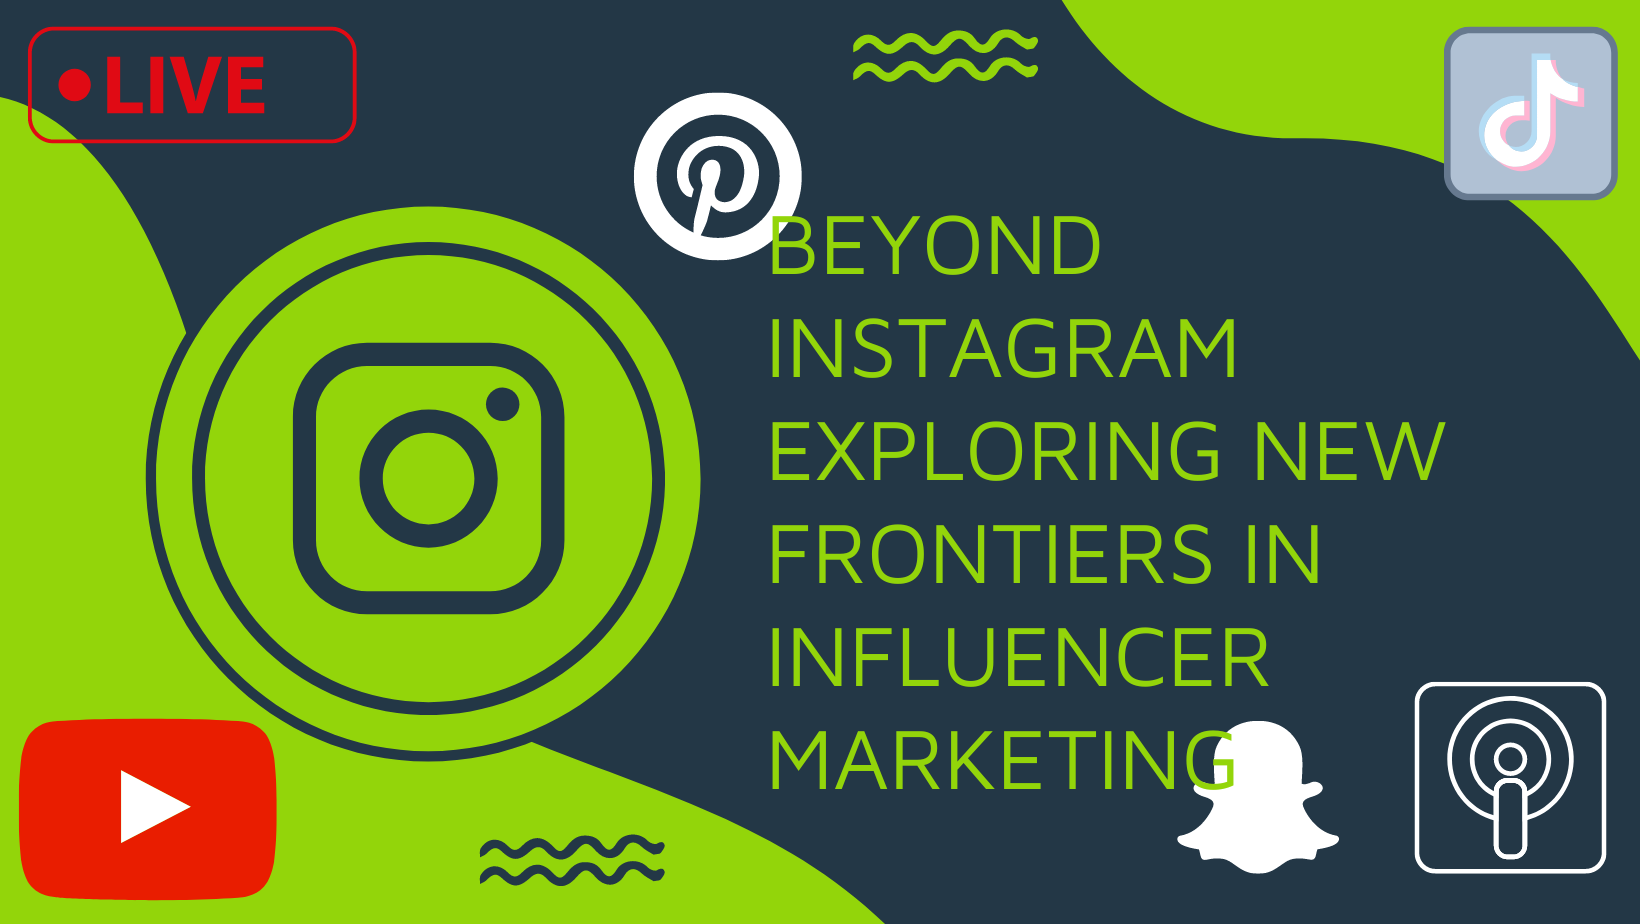 Instagram has been the go-to platform for influencer collaborations, but as the digital landscape evolves, new opportunities are emerging.